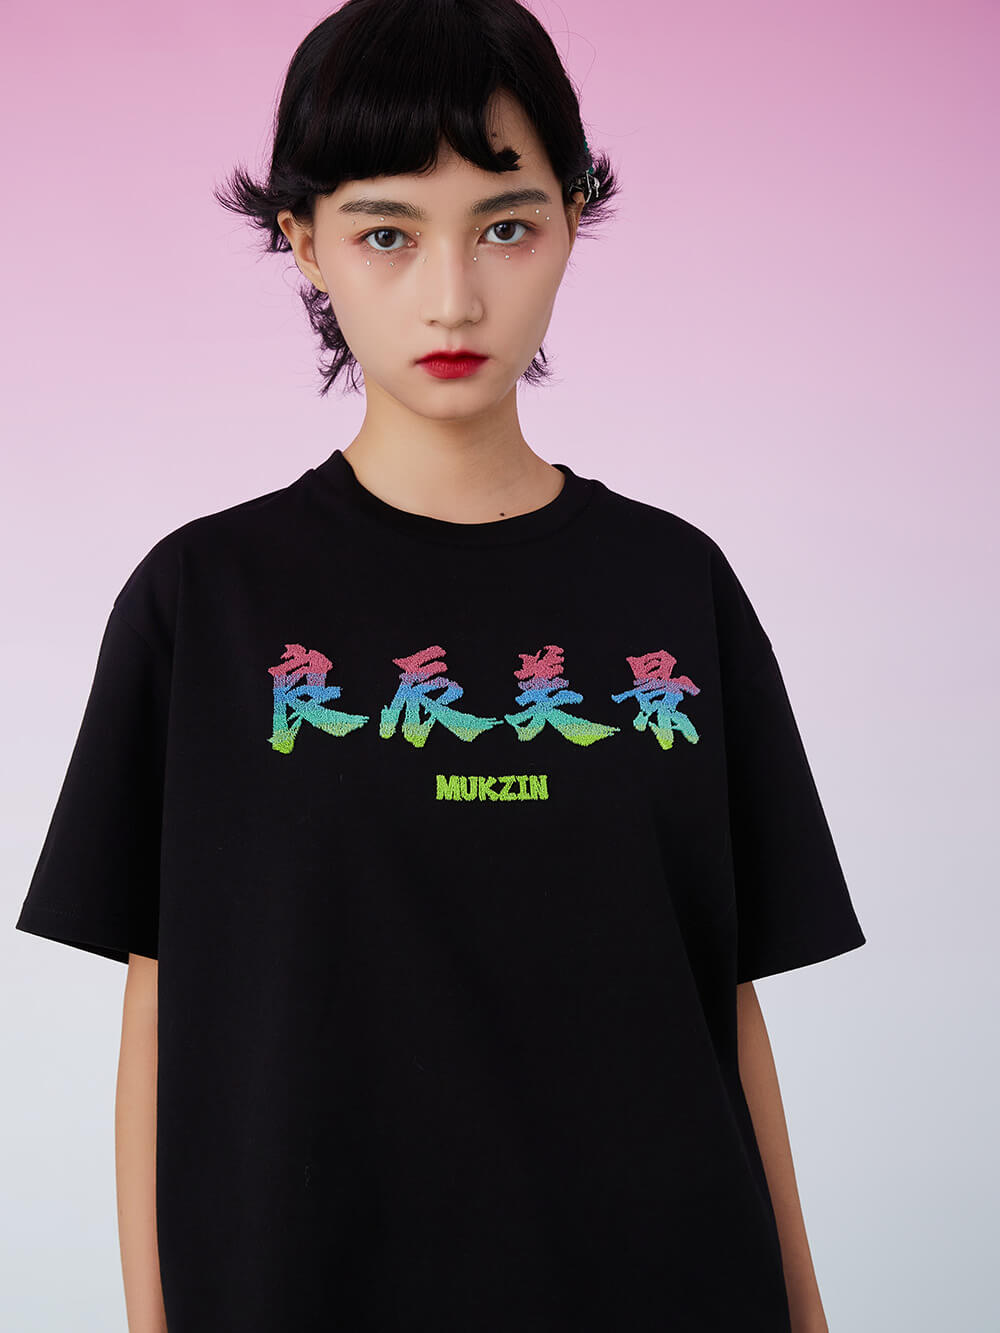 Discover T-shirt From Online Store | MUKZIN